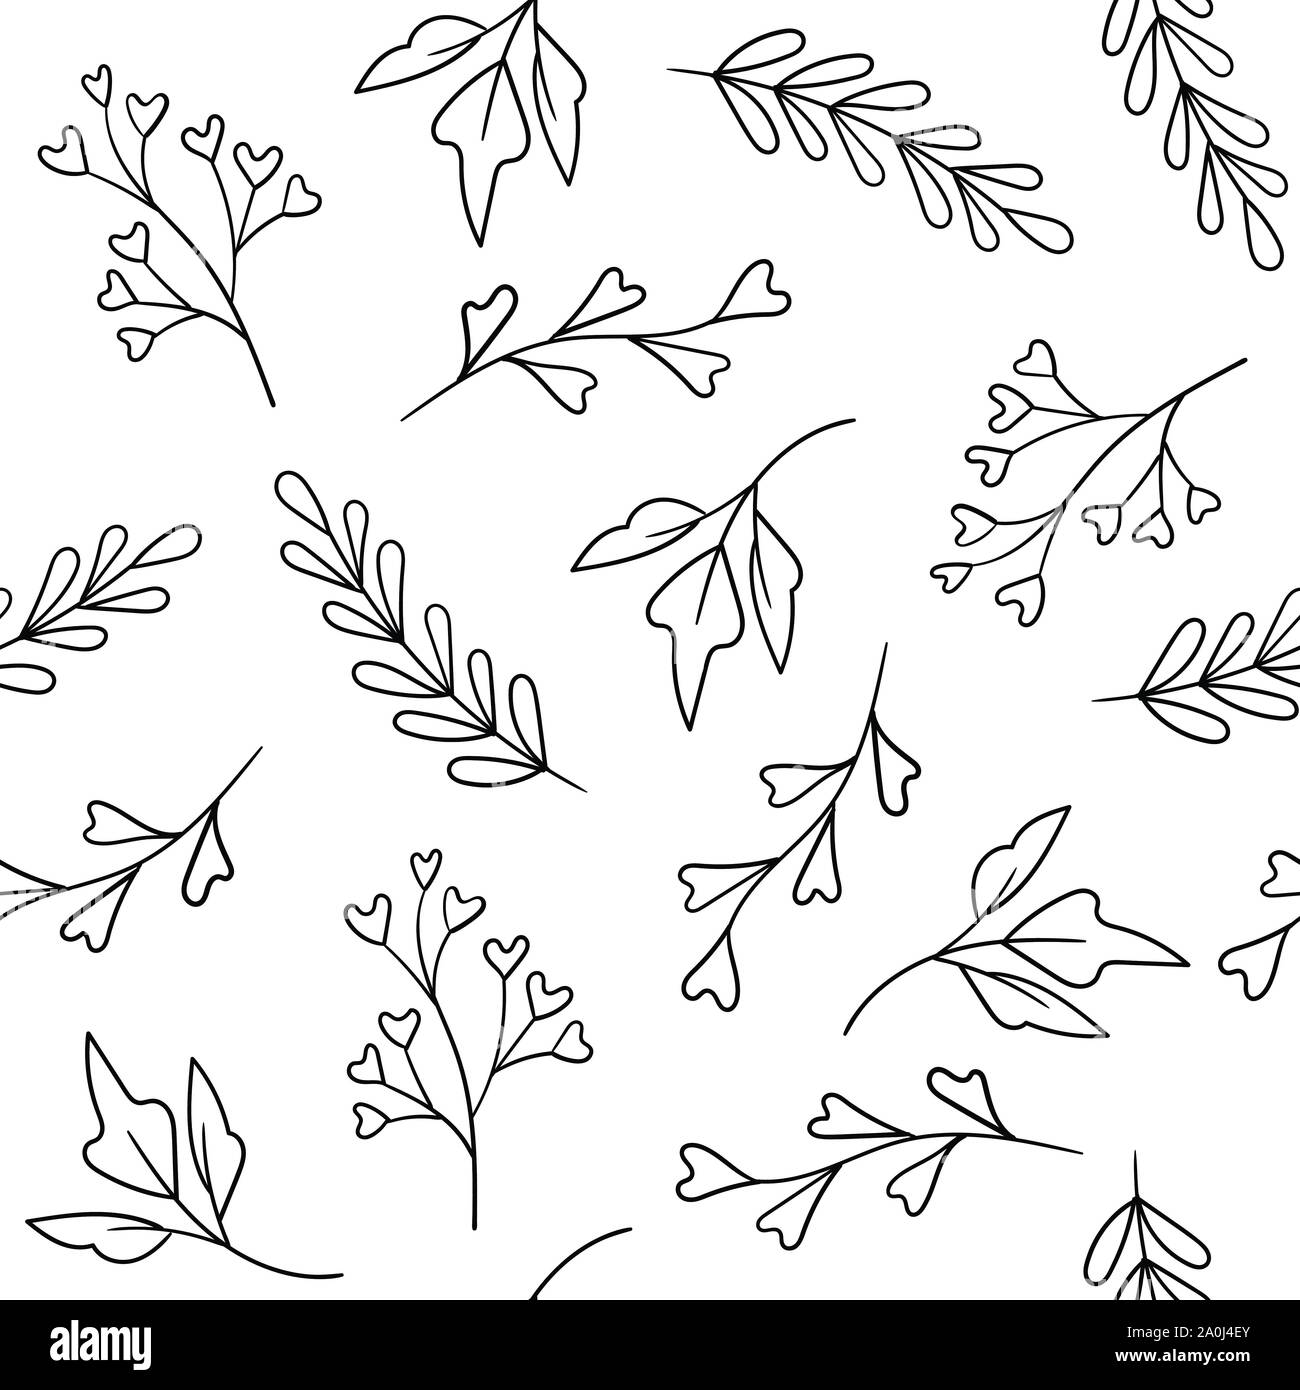 Vector floral seamless pattern, hand drawn plants Stock Vector